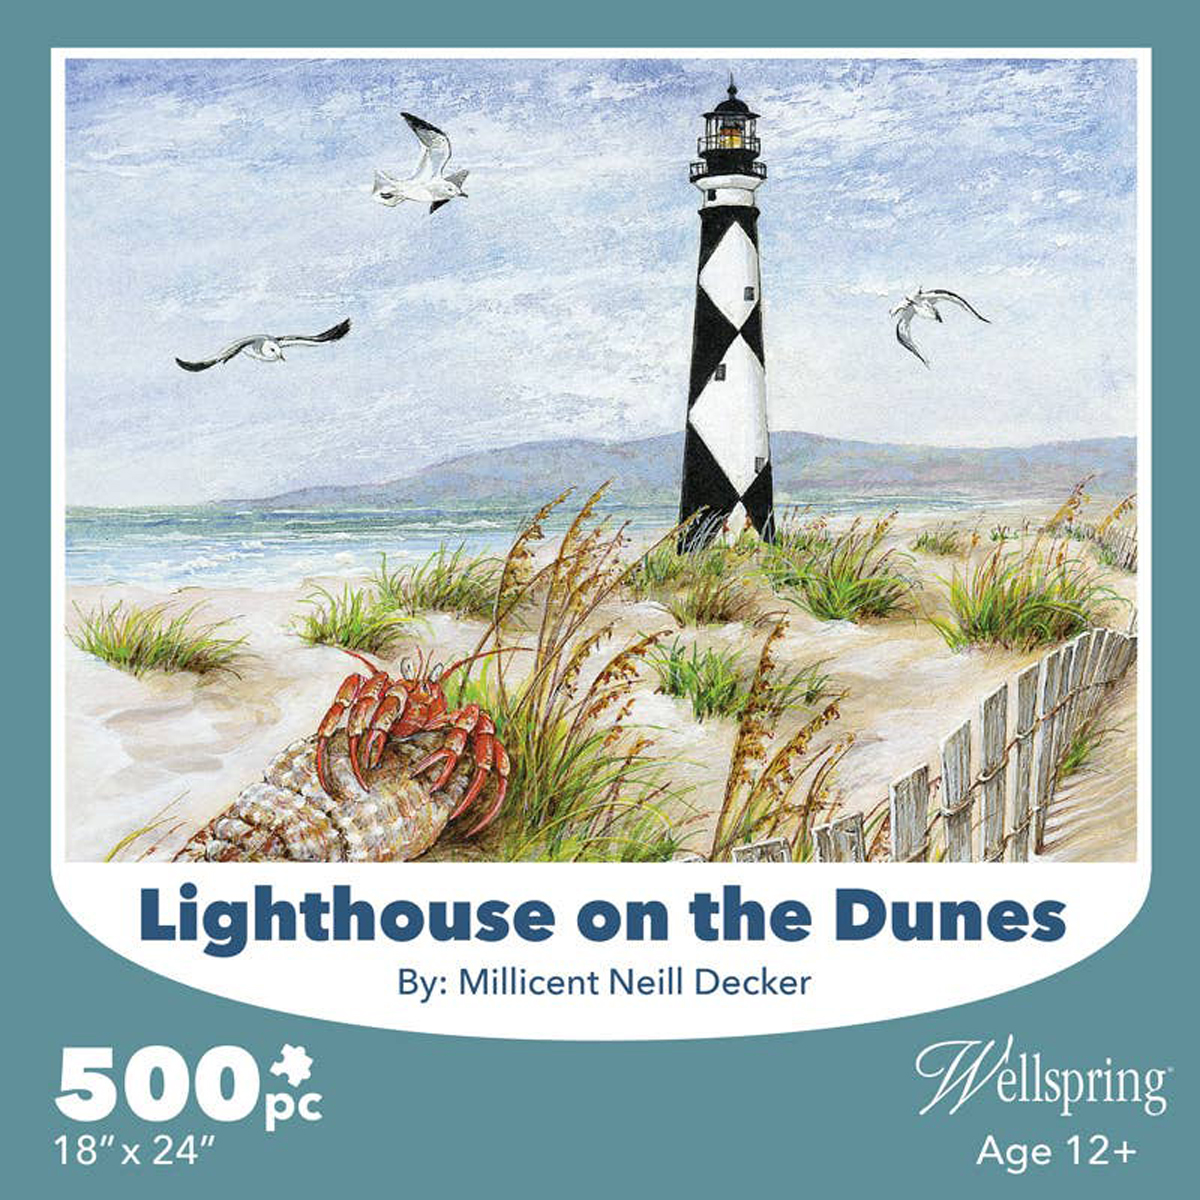 Lighthouse on the Dunes